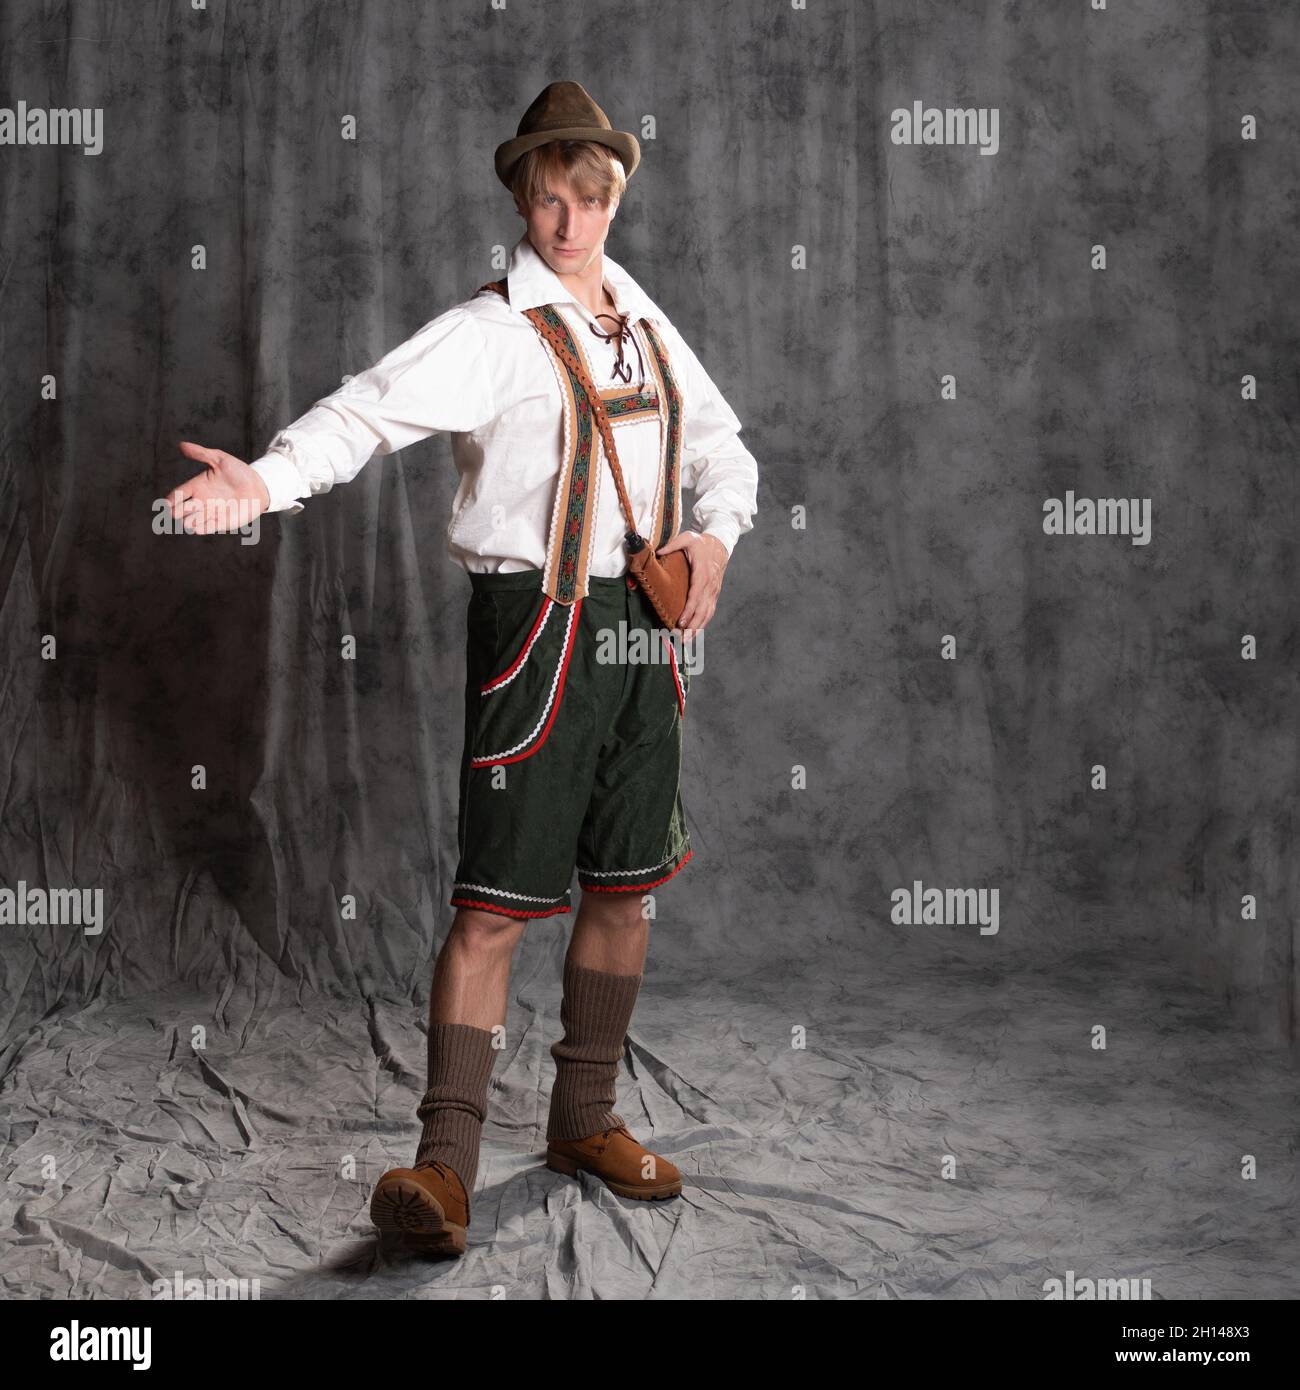 A young man in a national Bavarian suit with shorts on suspenders and a hat. Charismatic Bavarian full-length portrait, pose with outstretched arms, p Stock Photo